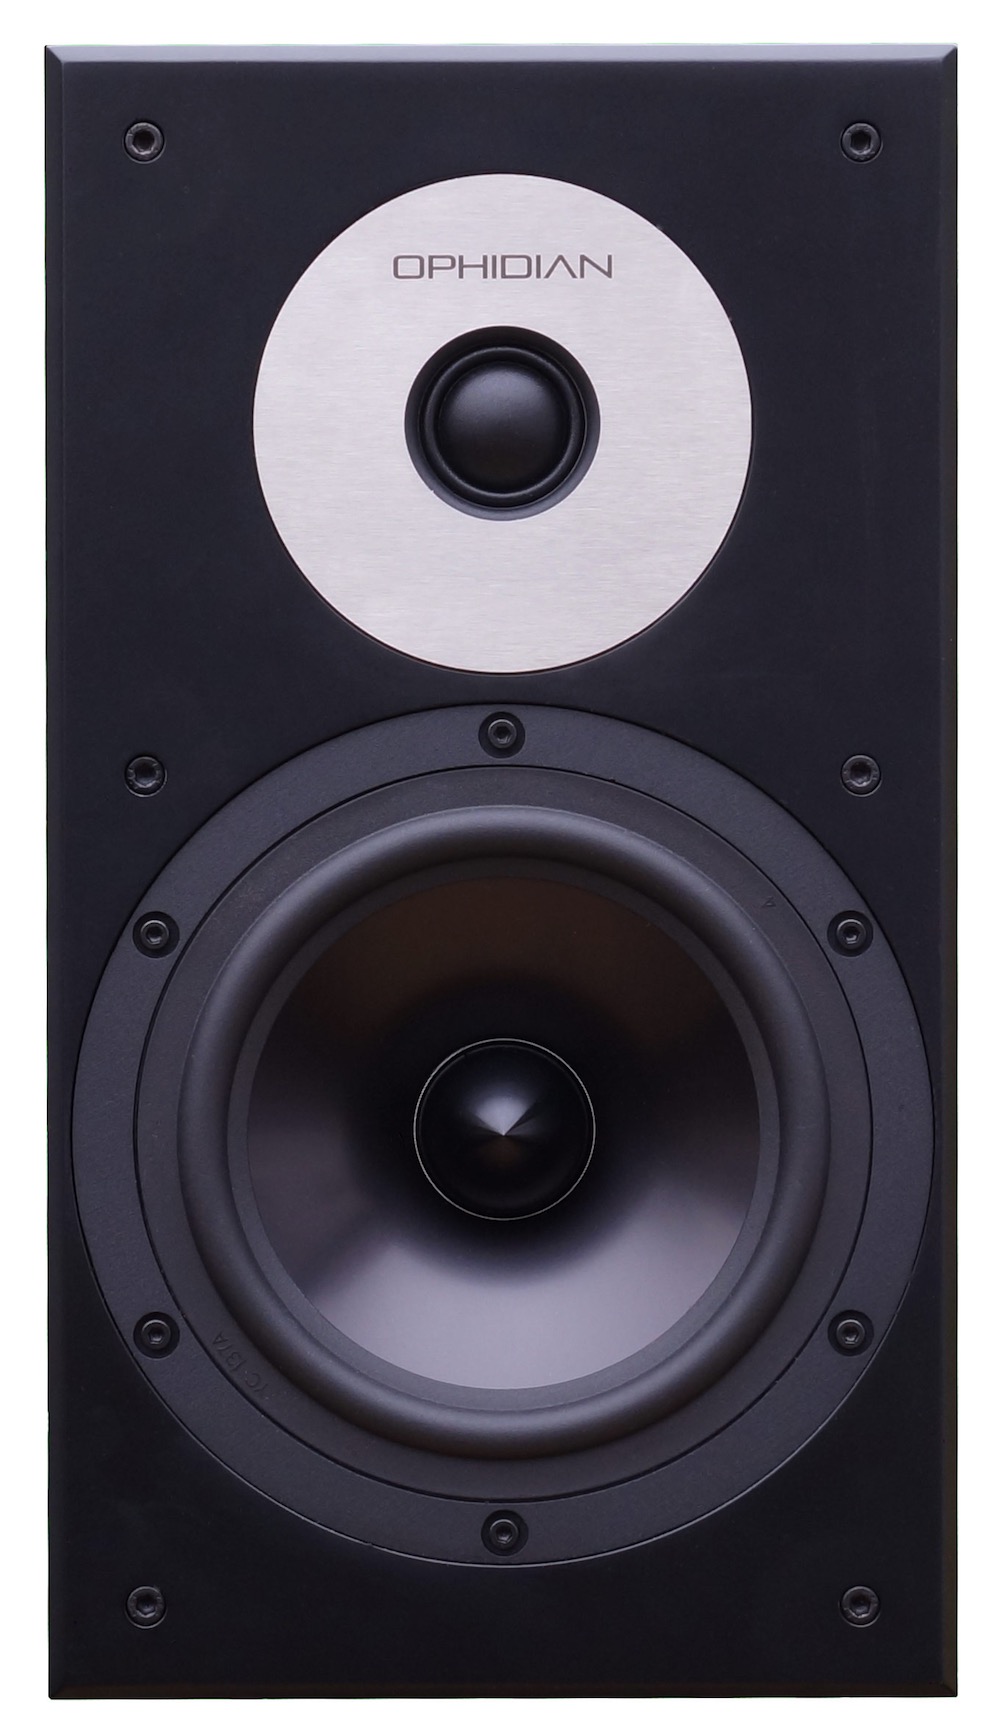 Prophet P1 Speakers from Ophidian: Divine Messages?